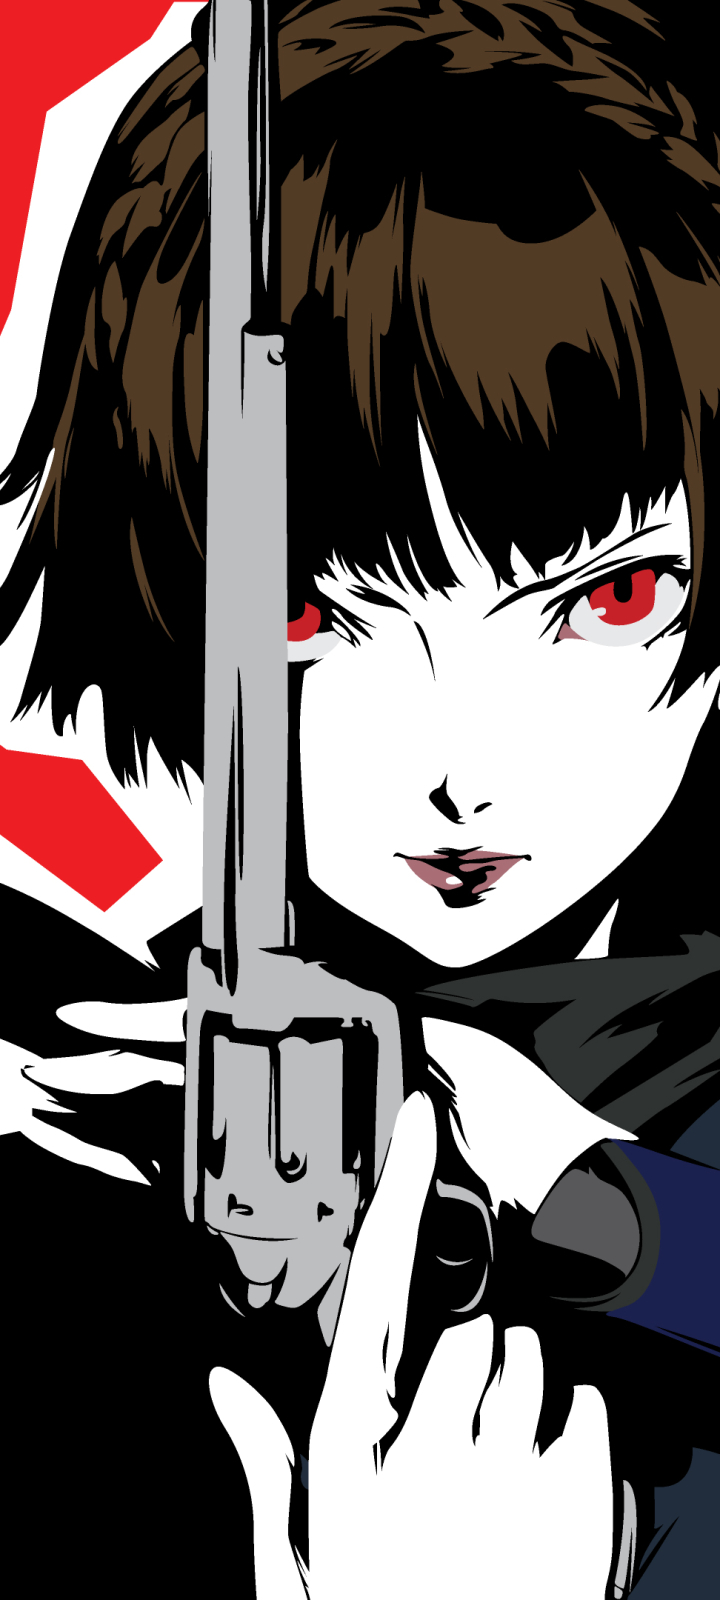 Upscaled P5S art feel free to use it as your wallpaper Persona5